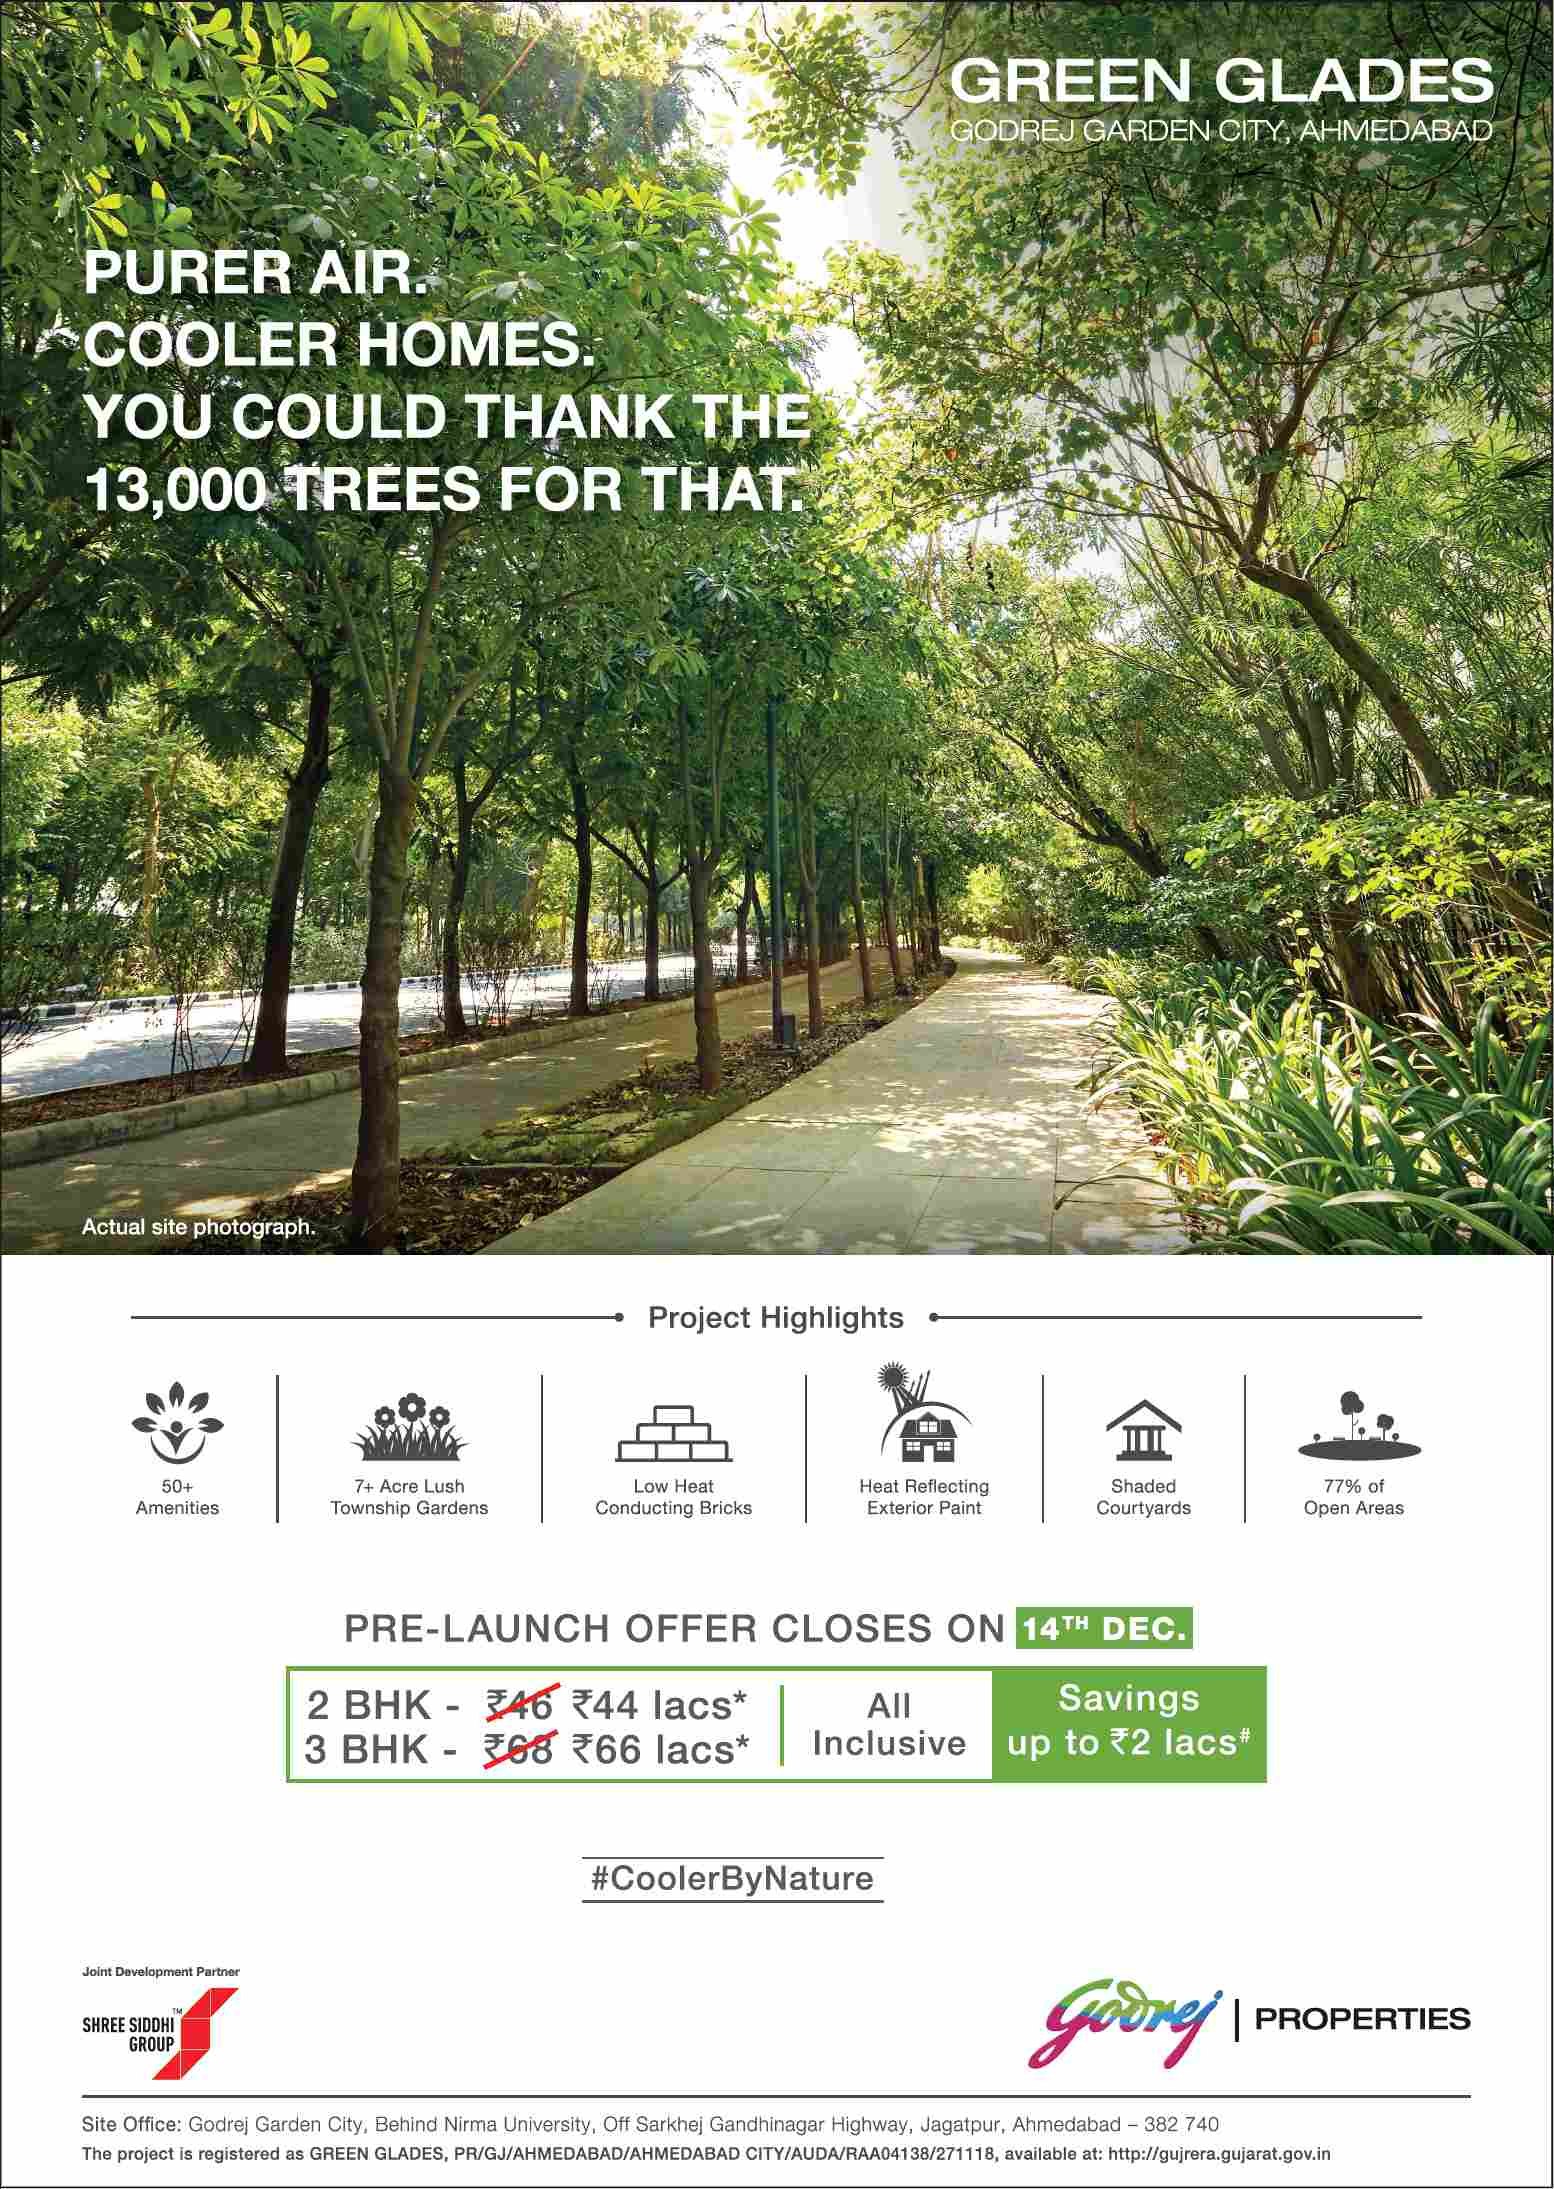 Avail the pre-launch offer & save up to Rs 2 Lacs at Godrej Green Glades in Ahmedabad Update